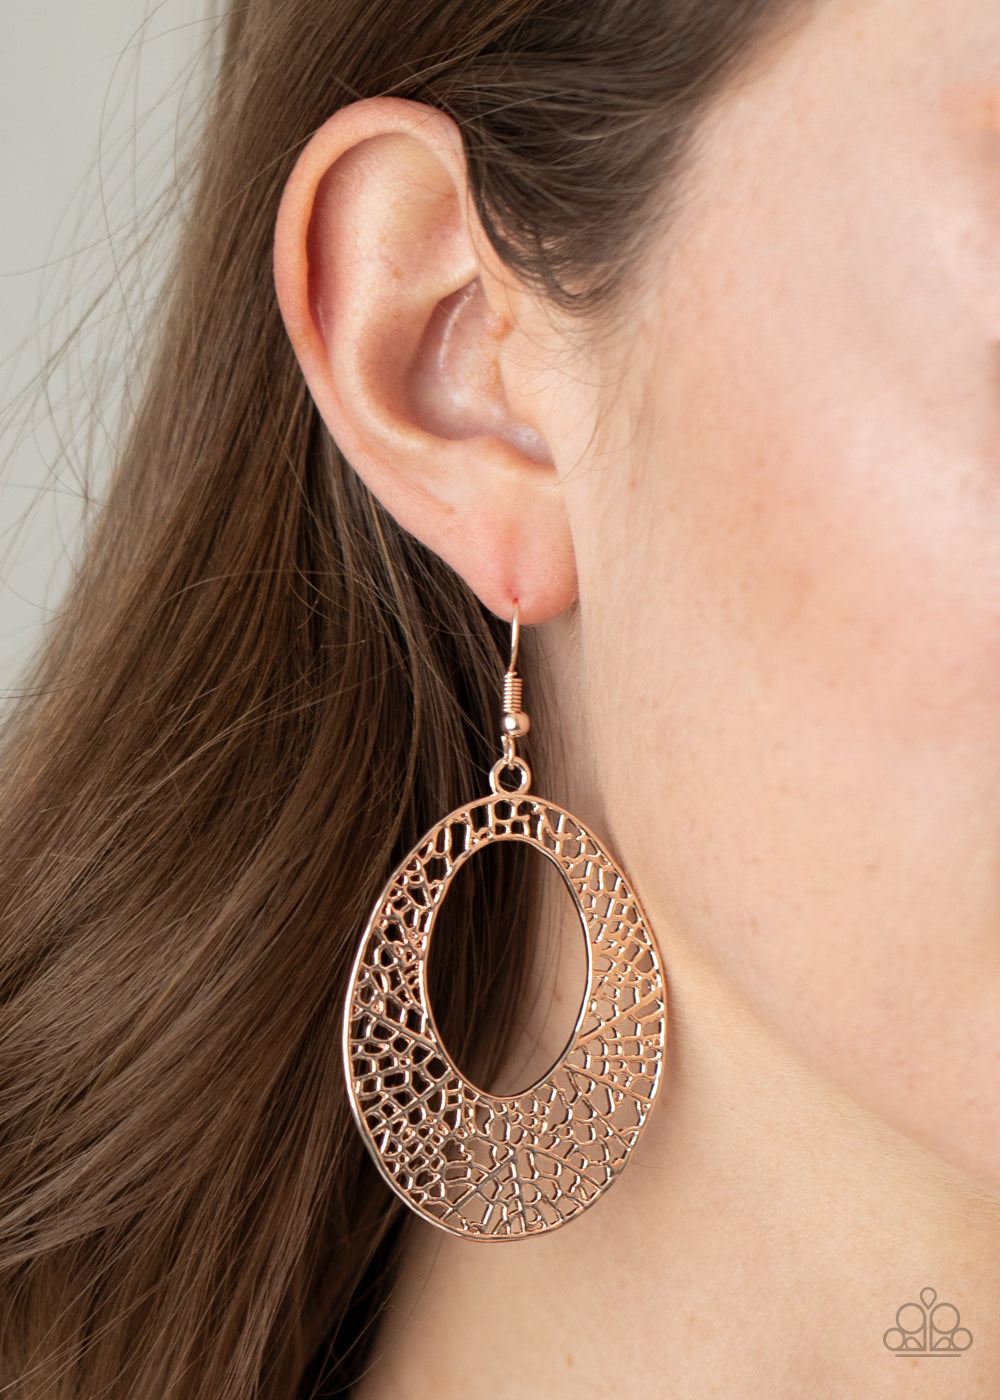 Paparazzi Earrings - Serenely Shattered - Rose Gold